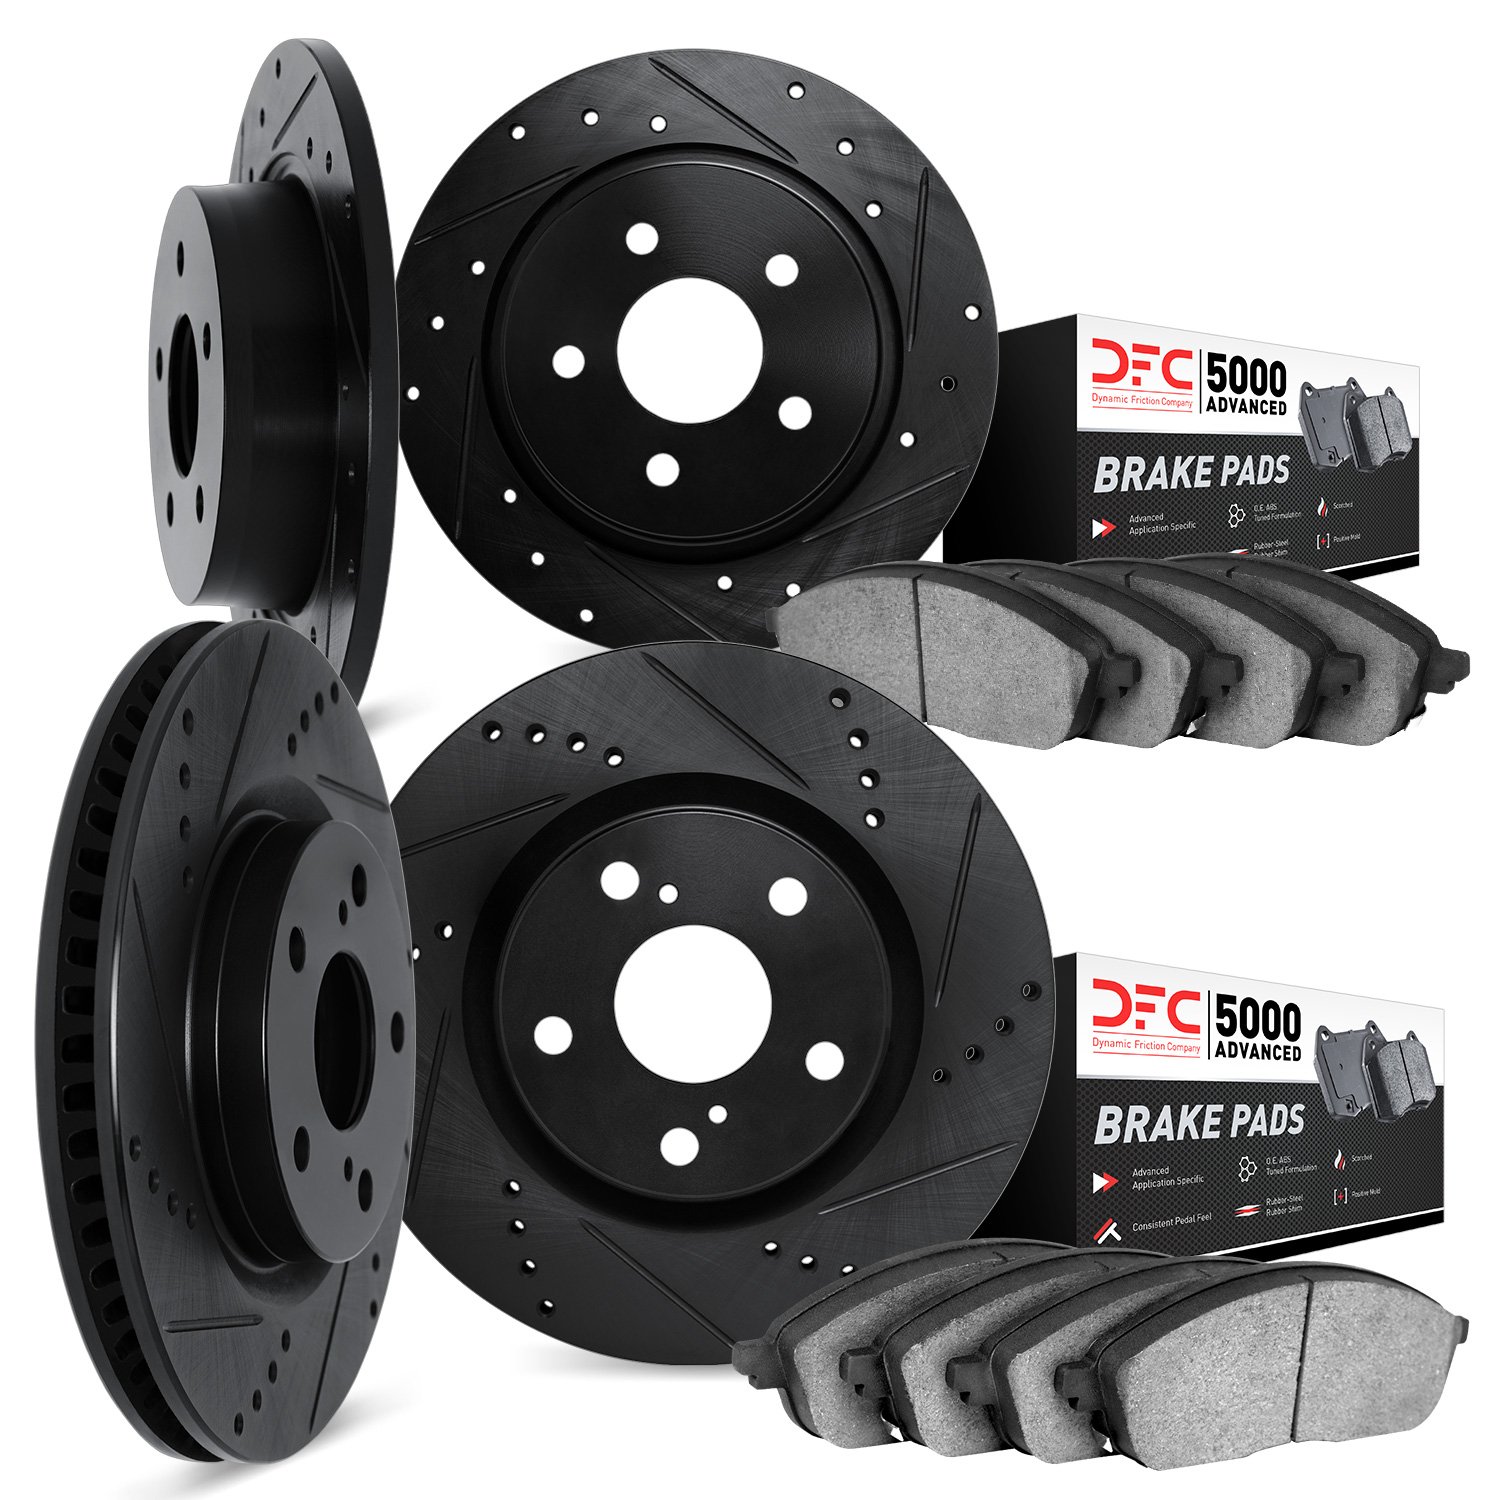 8504-31000 Drilled/Slotted Brake Rotors w/5000 Advanced Brake Pads Kit [Black], 1979-1981 BMW, Position: Front and Rear